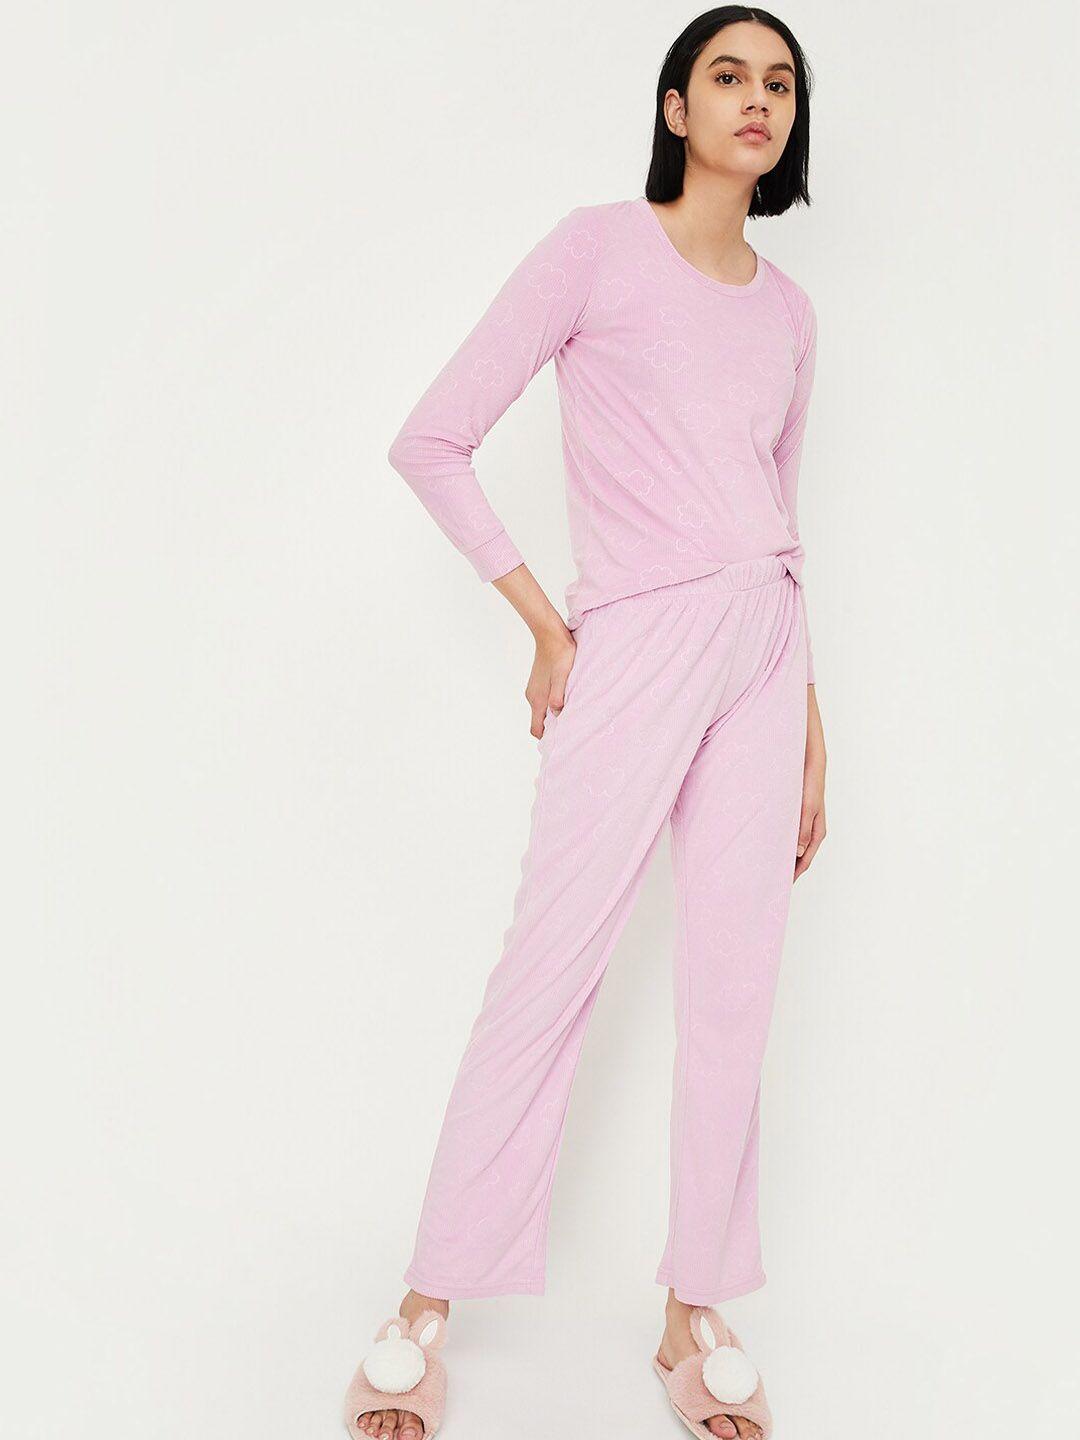 max long sleeves night suit